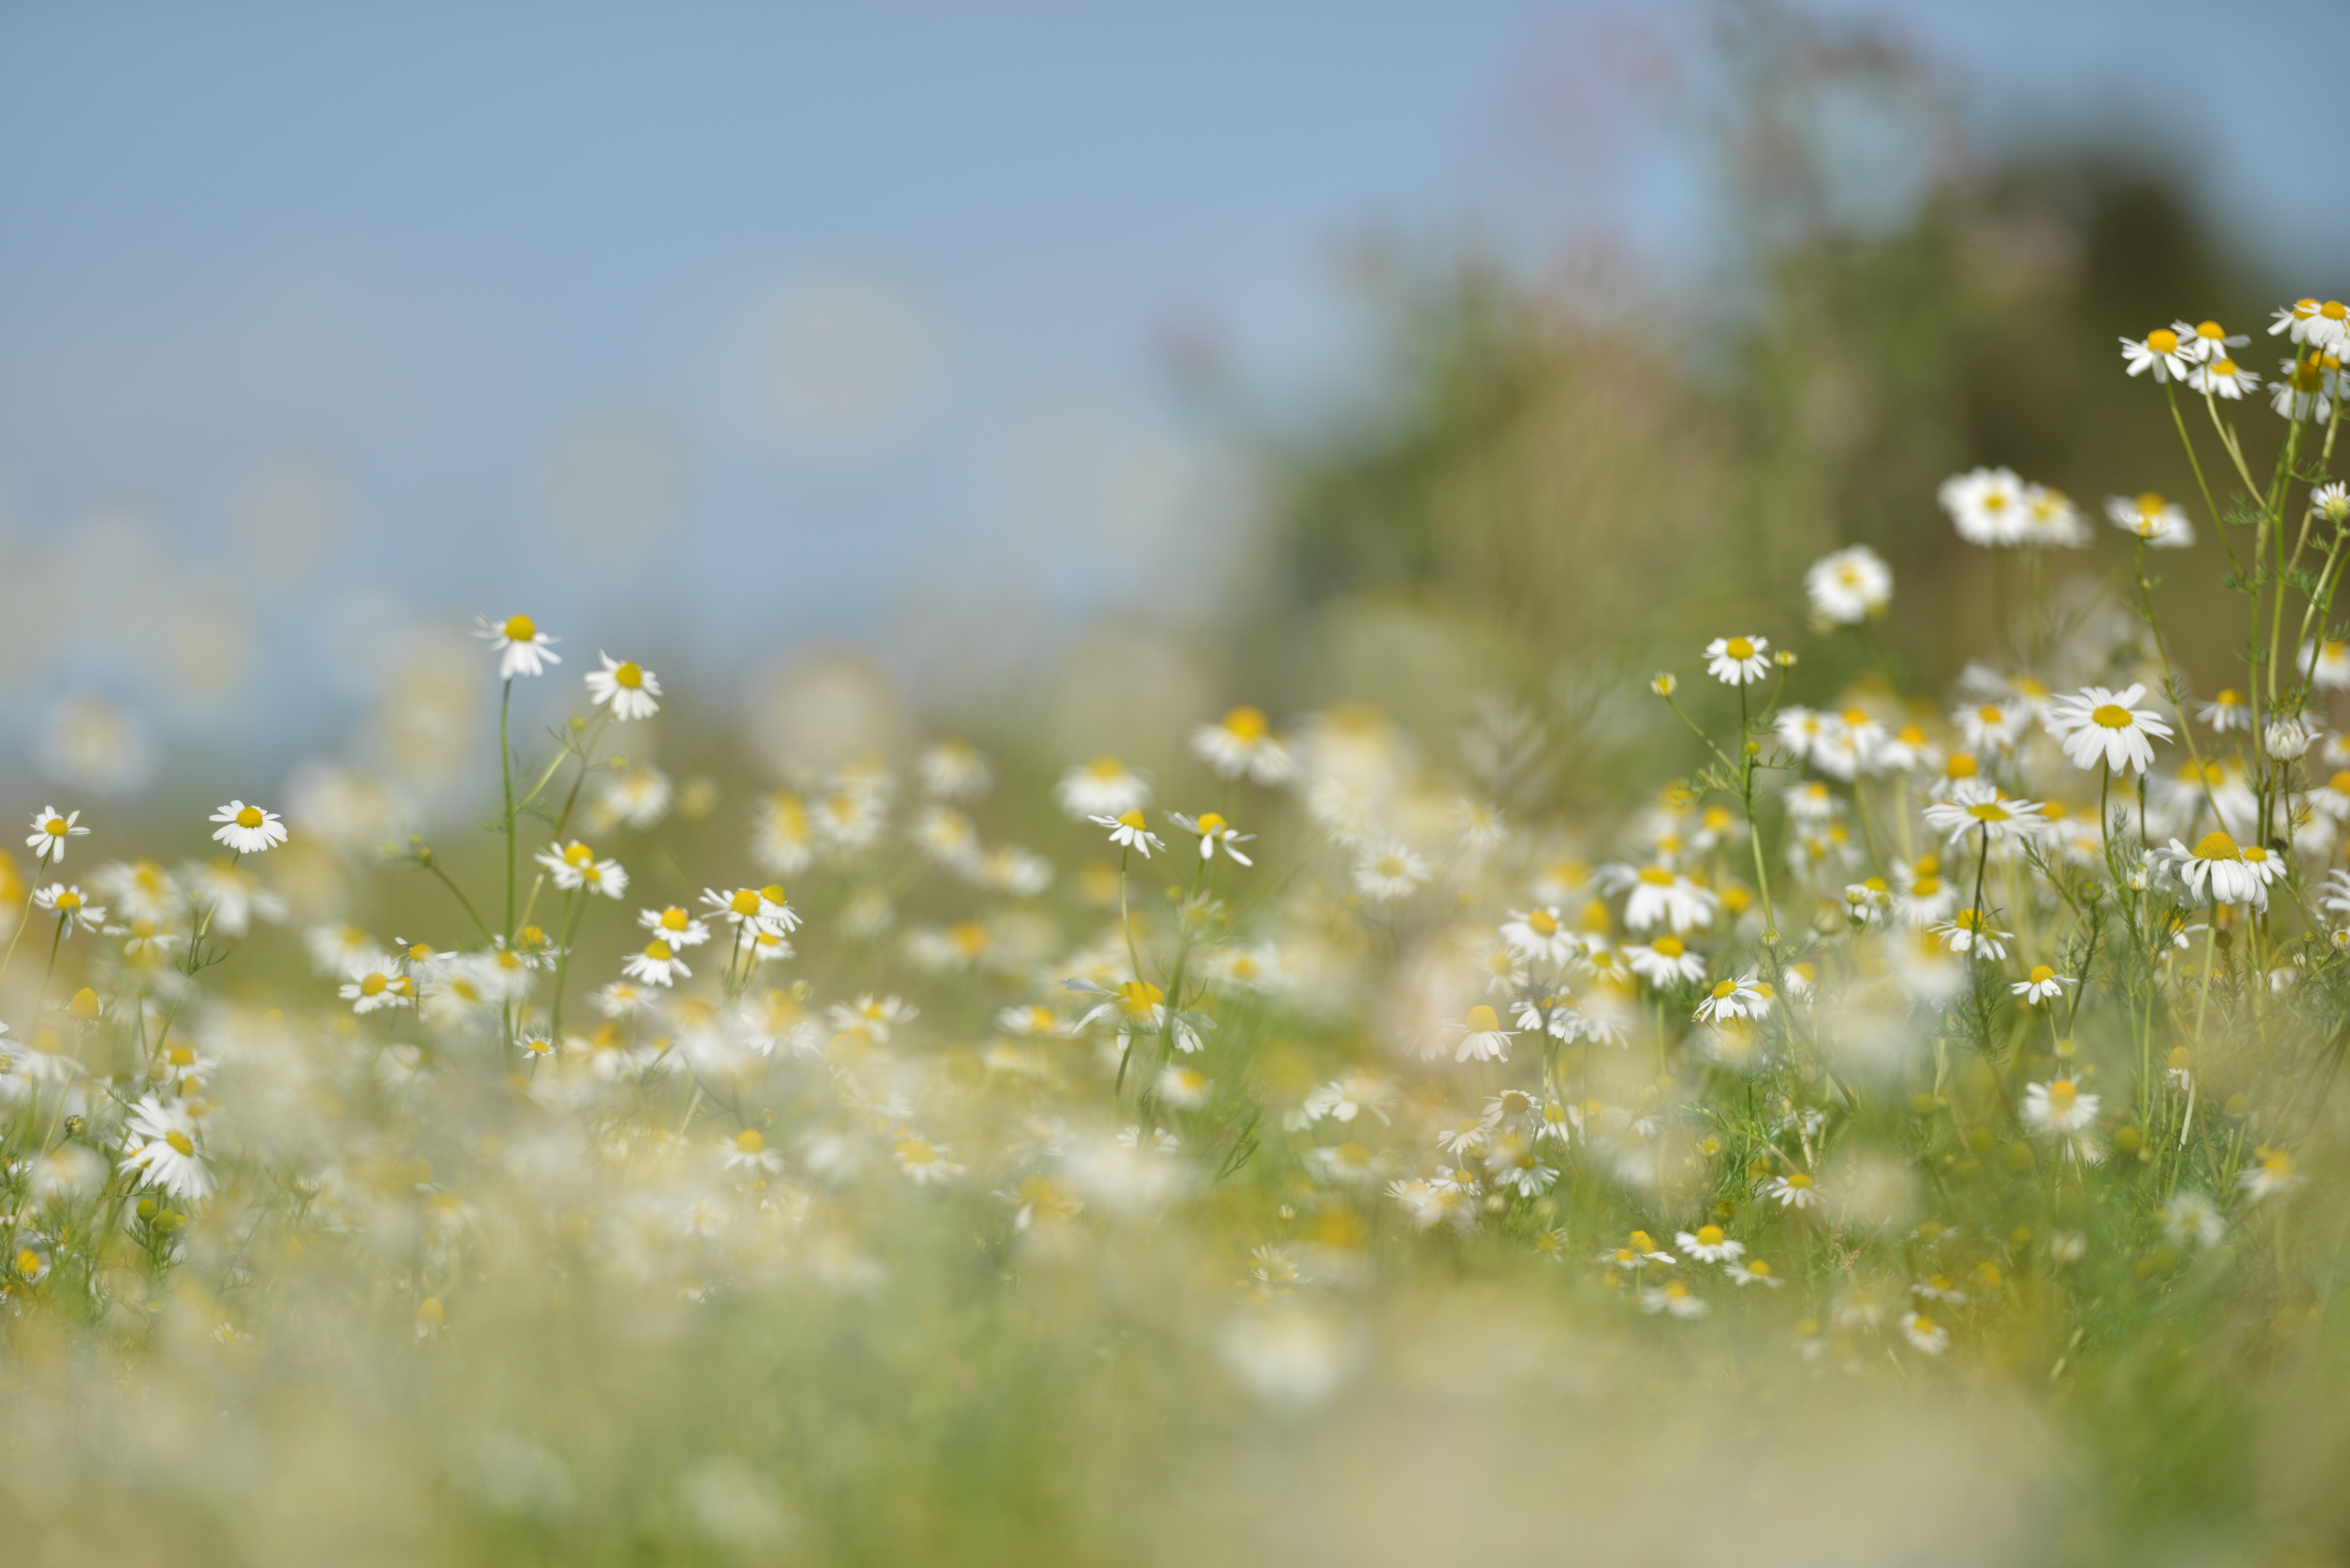 Free Image, water, nature, blossom, dew, sky, field, lawn, meadow, prairie, sunlight, morning, leaf, floral, green, autumn, yellow, flora, wildflower, flowers, close up, grassland, daisies, moisture, macro photography, flower wallpaper, daisy